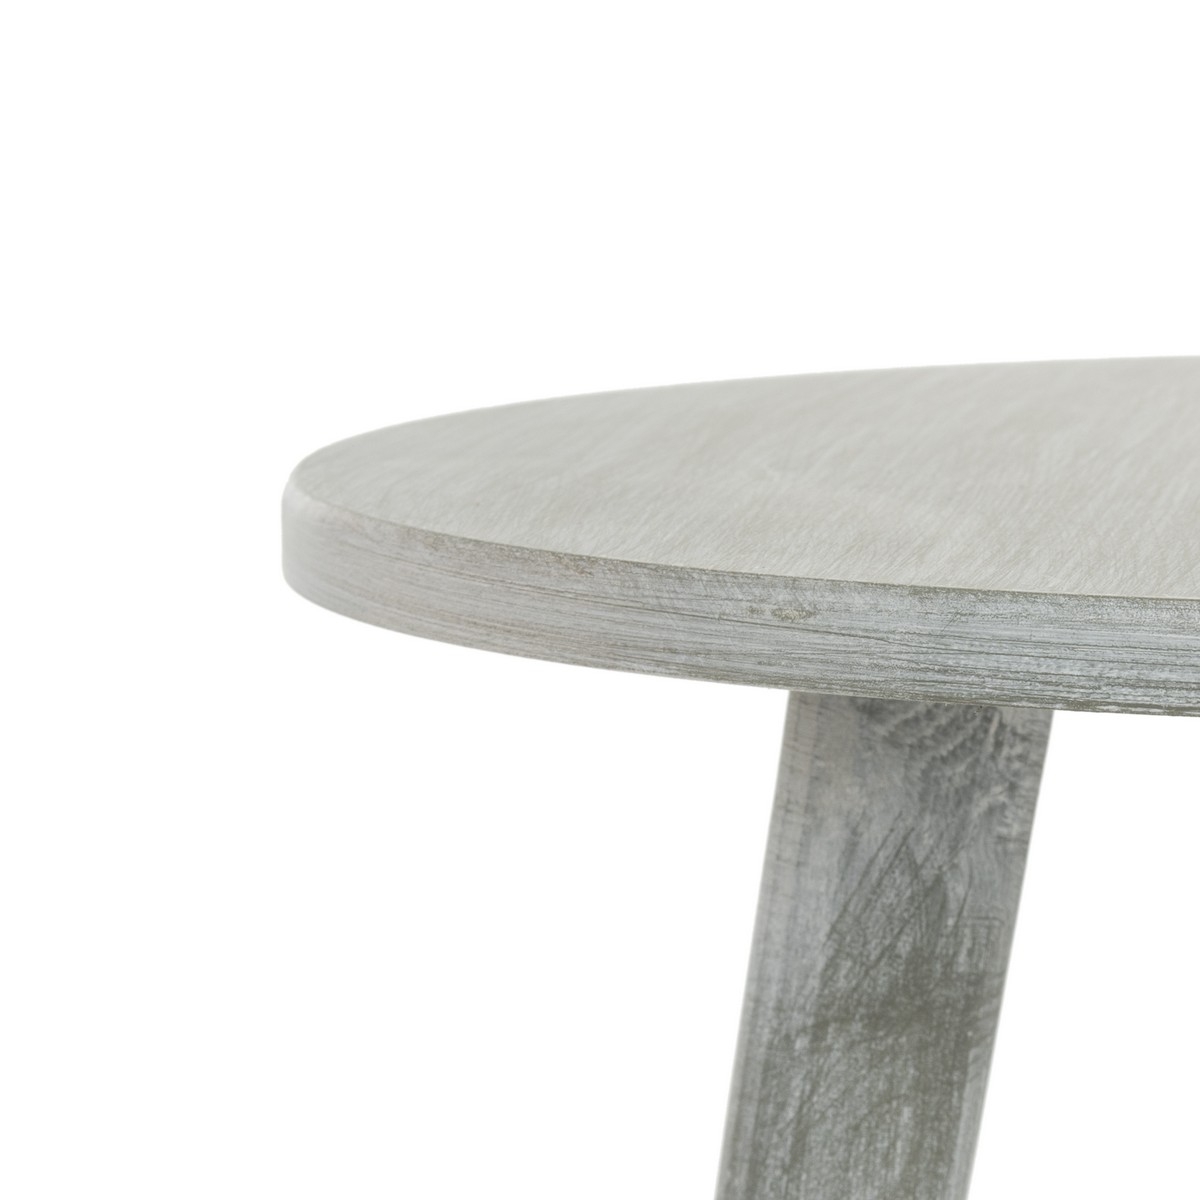 Orion Round Accent Table - Slate/Grey - Arlo Home - Image 4